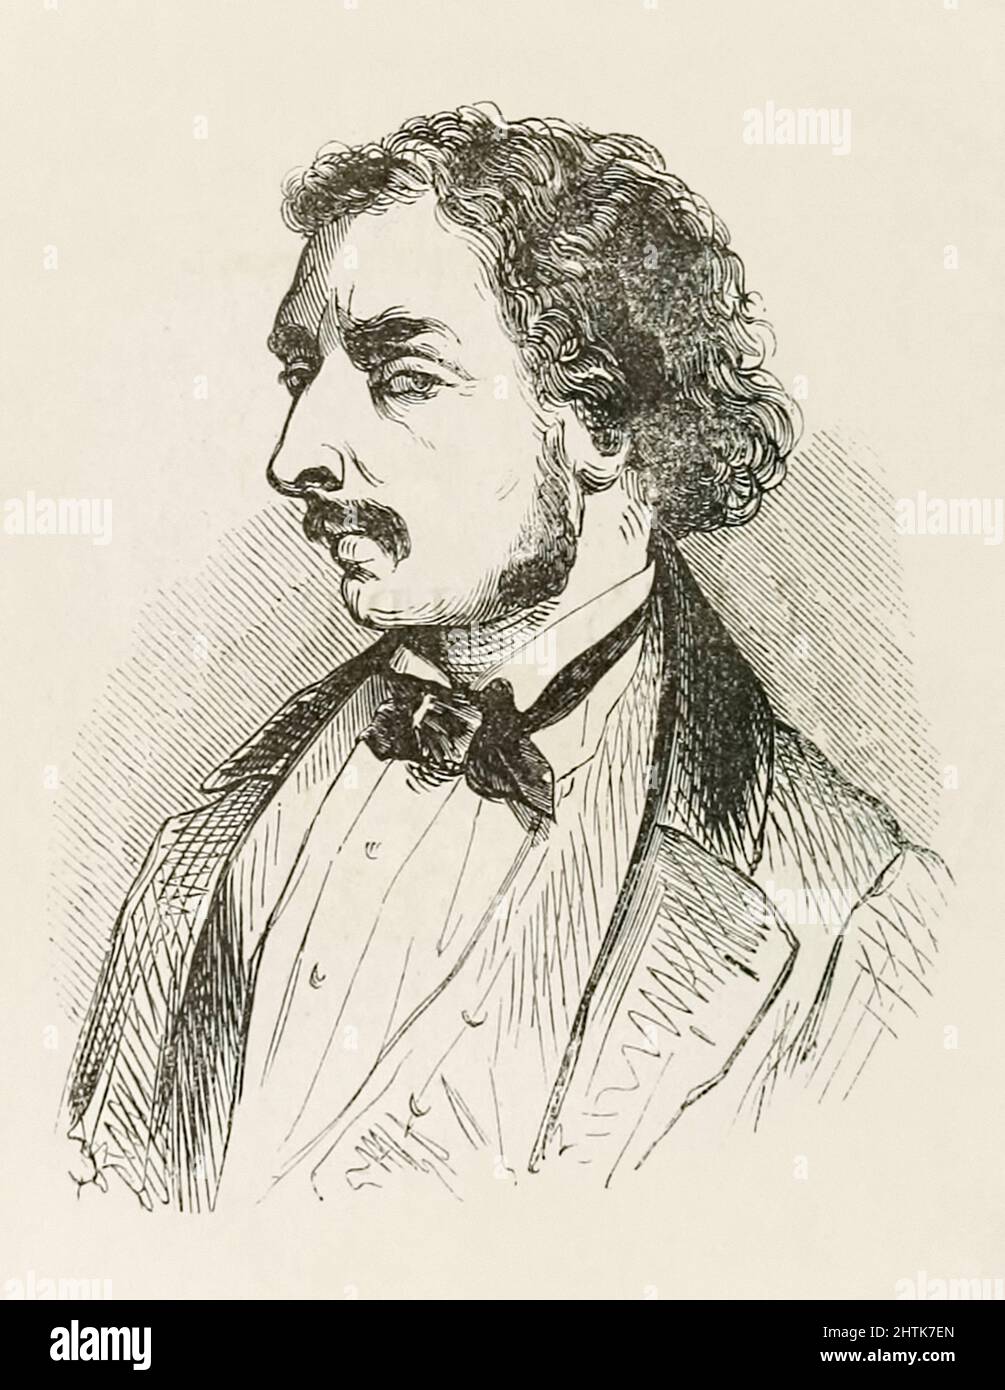 Pierre François Lacenaire (1803-1836) French murderer and writer who achieved notoriety in French society when writing his memoirs whilst awaiting execution for a double murder. Photograph of an illustration published in 1864. Stock Photo